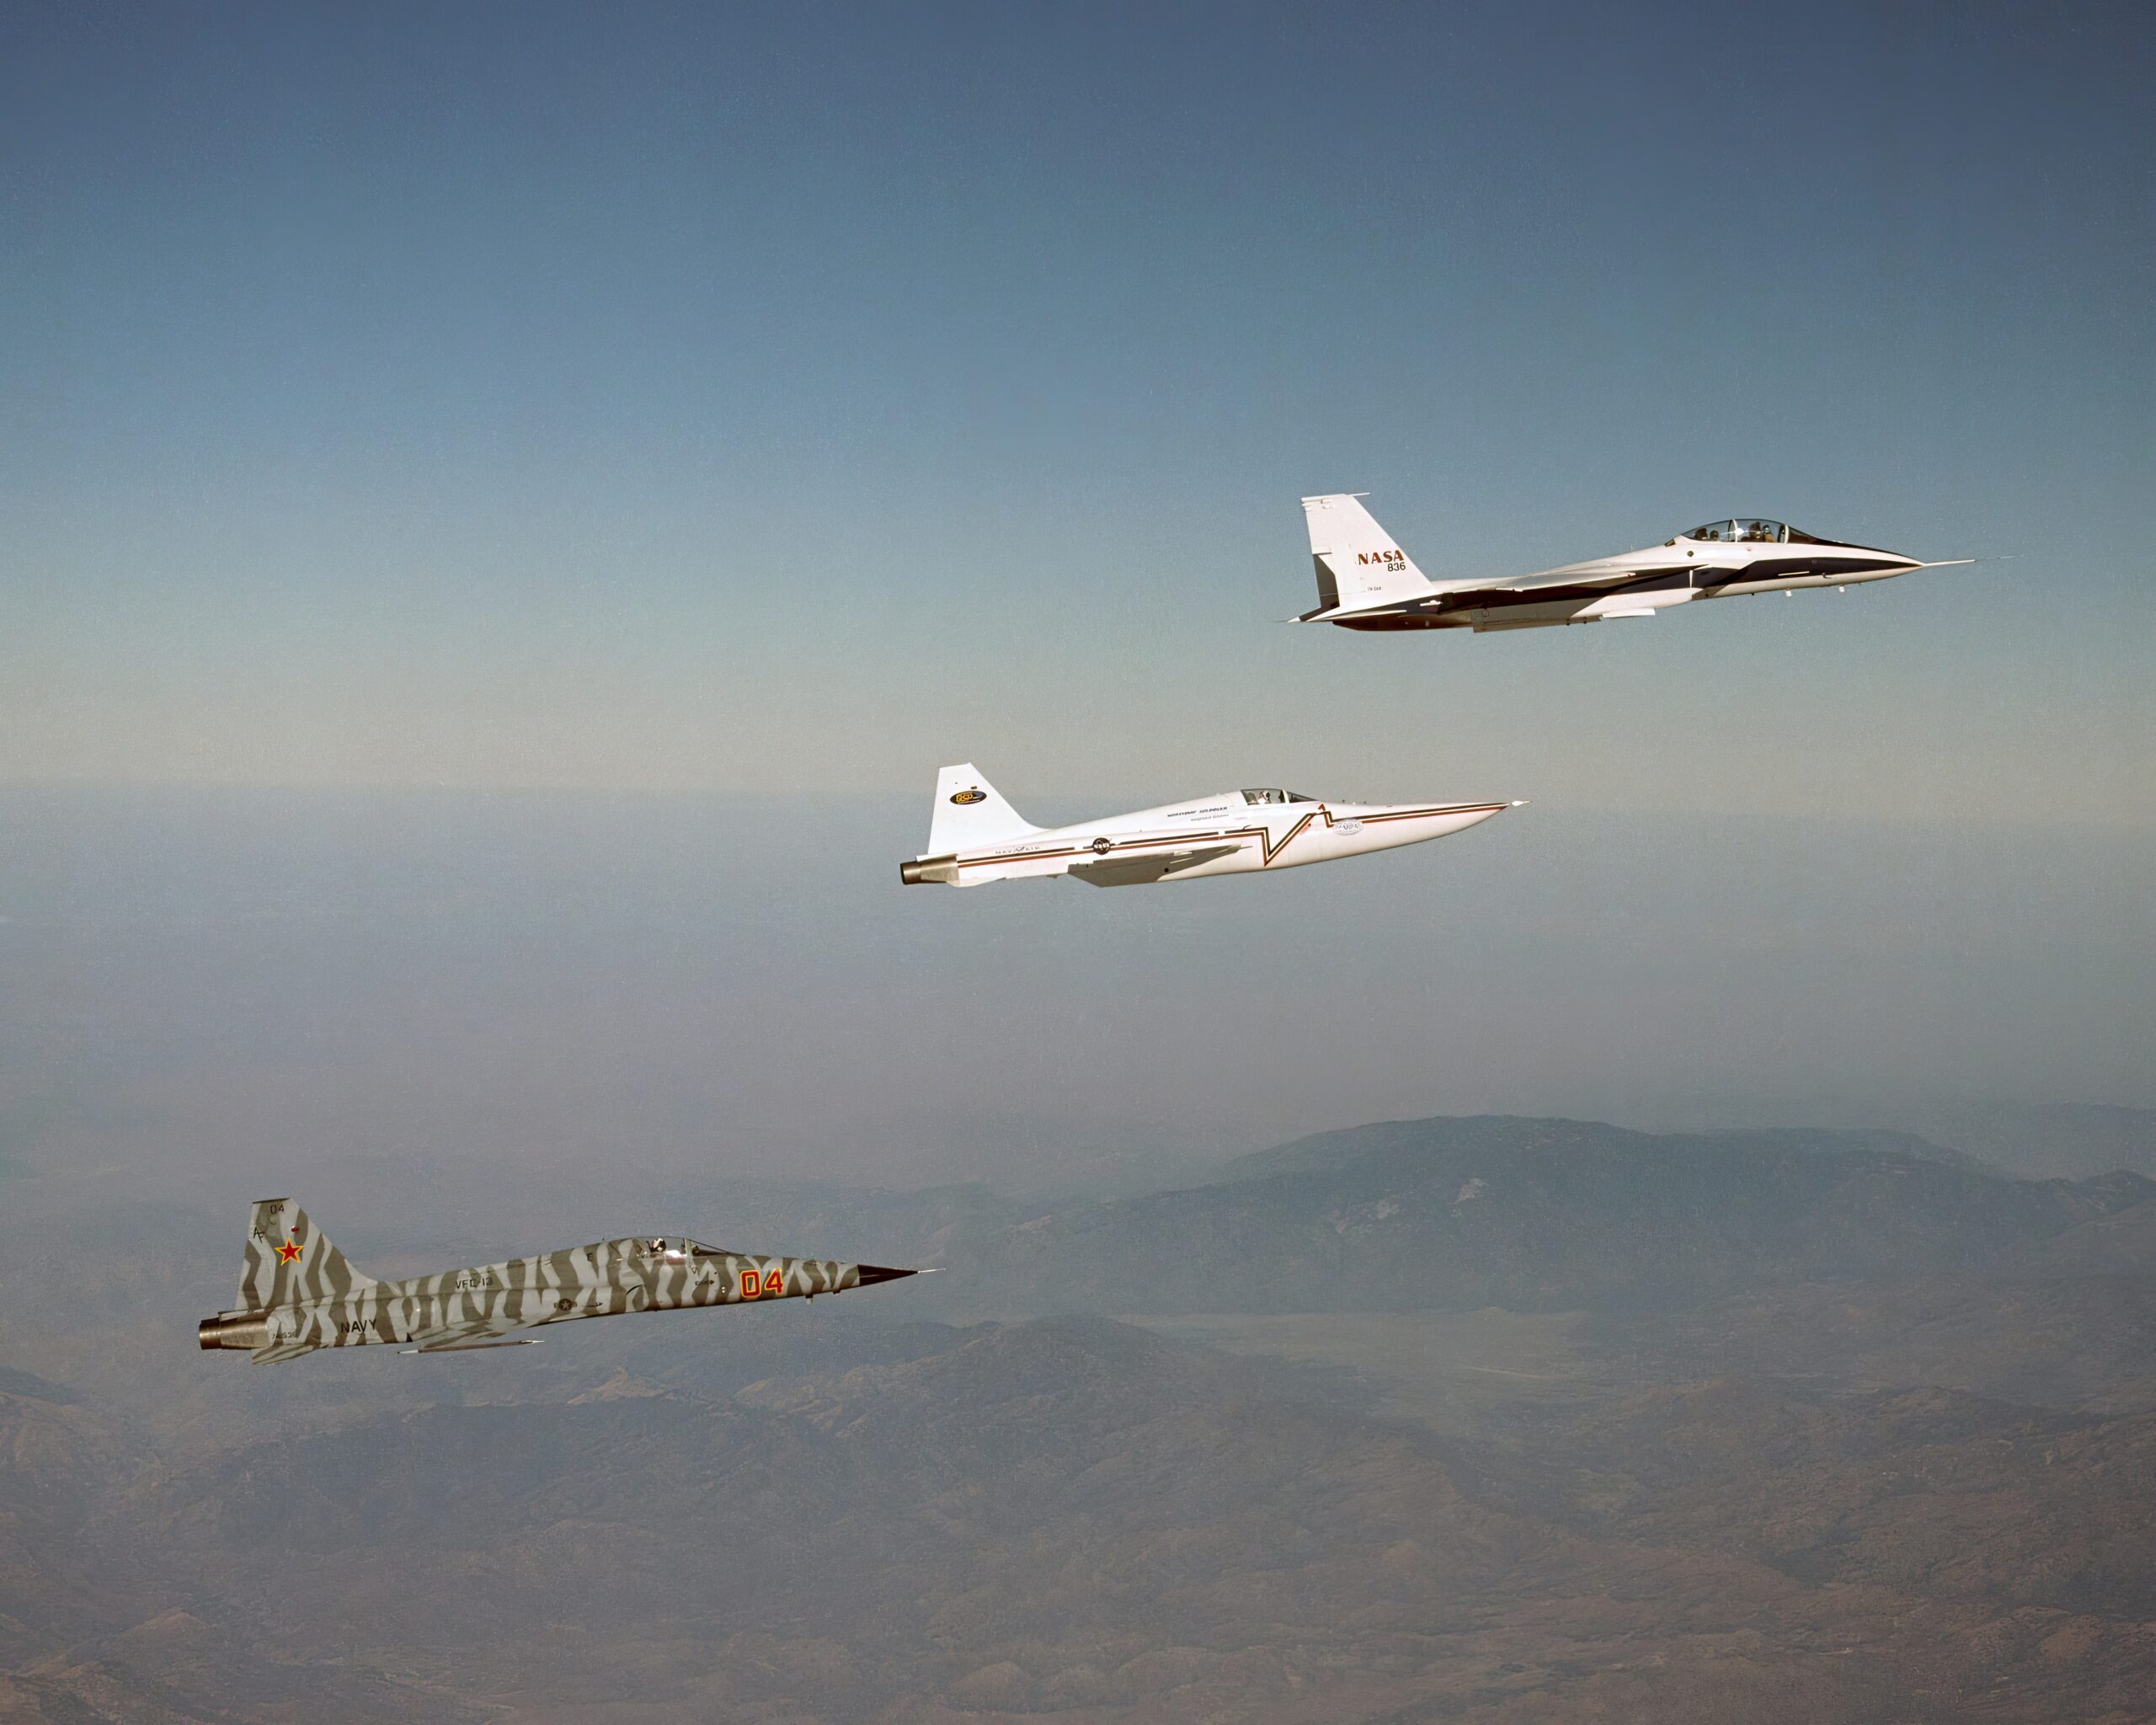 Northrop Grumman Corp.'s modified F-5E Shaped Sonic Boom Demonstration SSBD aircraft flies off the wing of NASA's F-15B Research testbed aircraft. The F-15B, from NASA's Dryden Flight Research Center